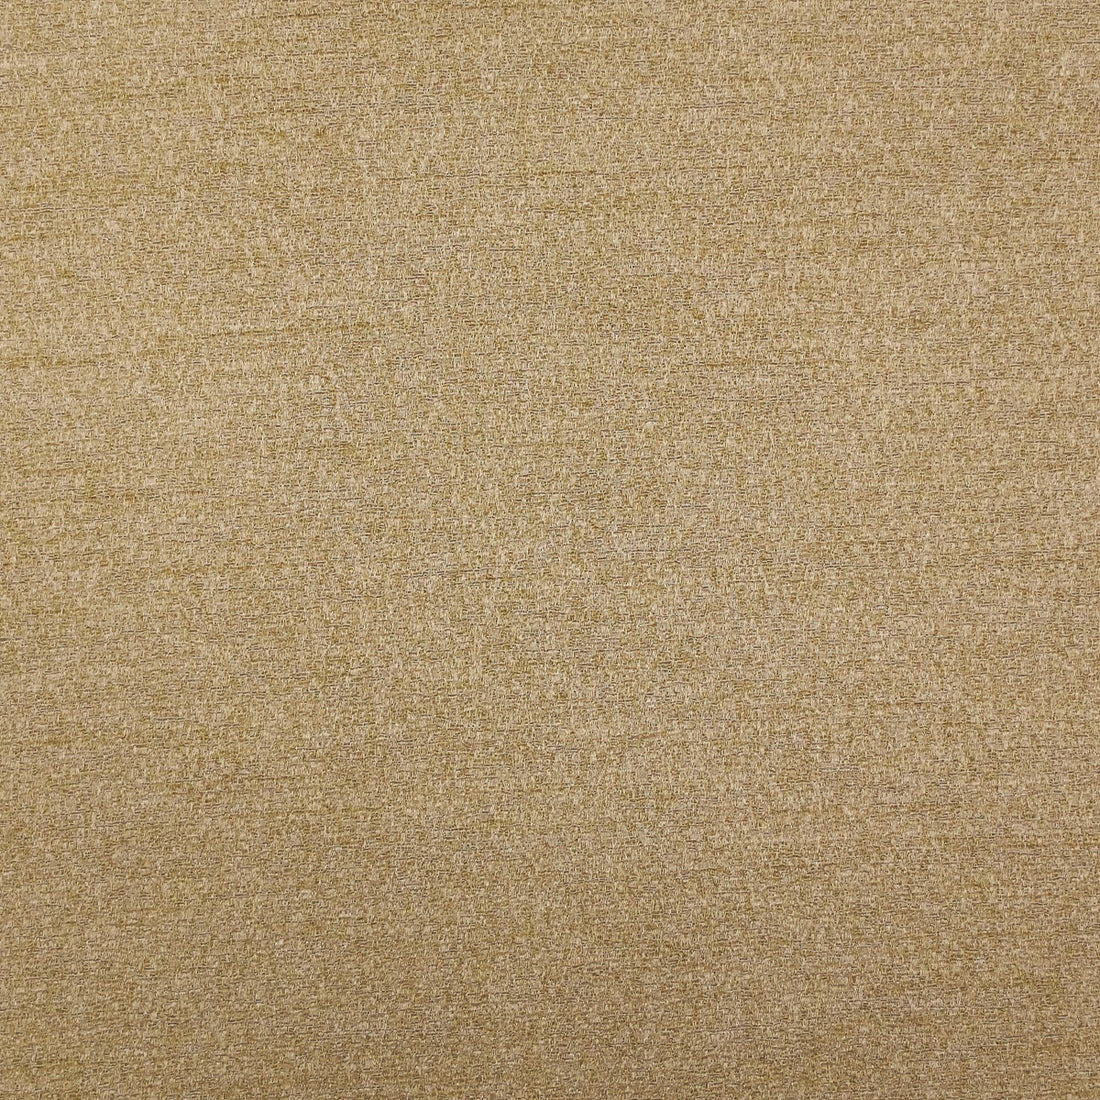 Fume fabric in 5 color - pattern LZ-30202.05.0 - by Kravet Design in the Lizzo collection